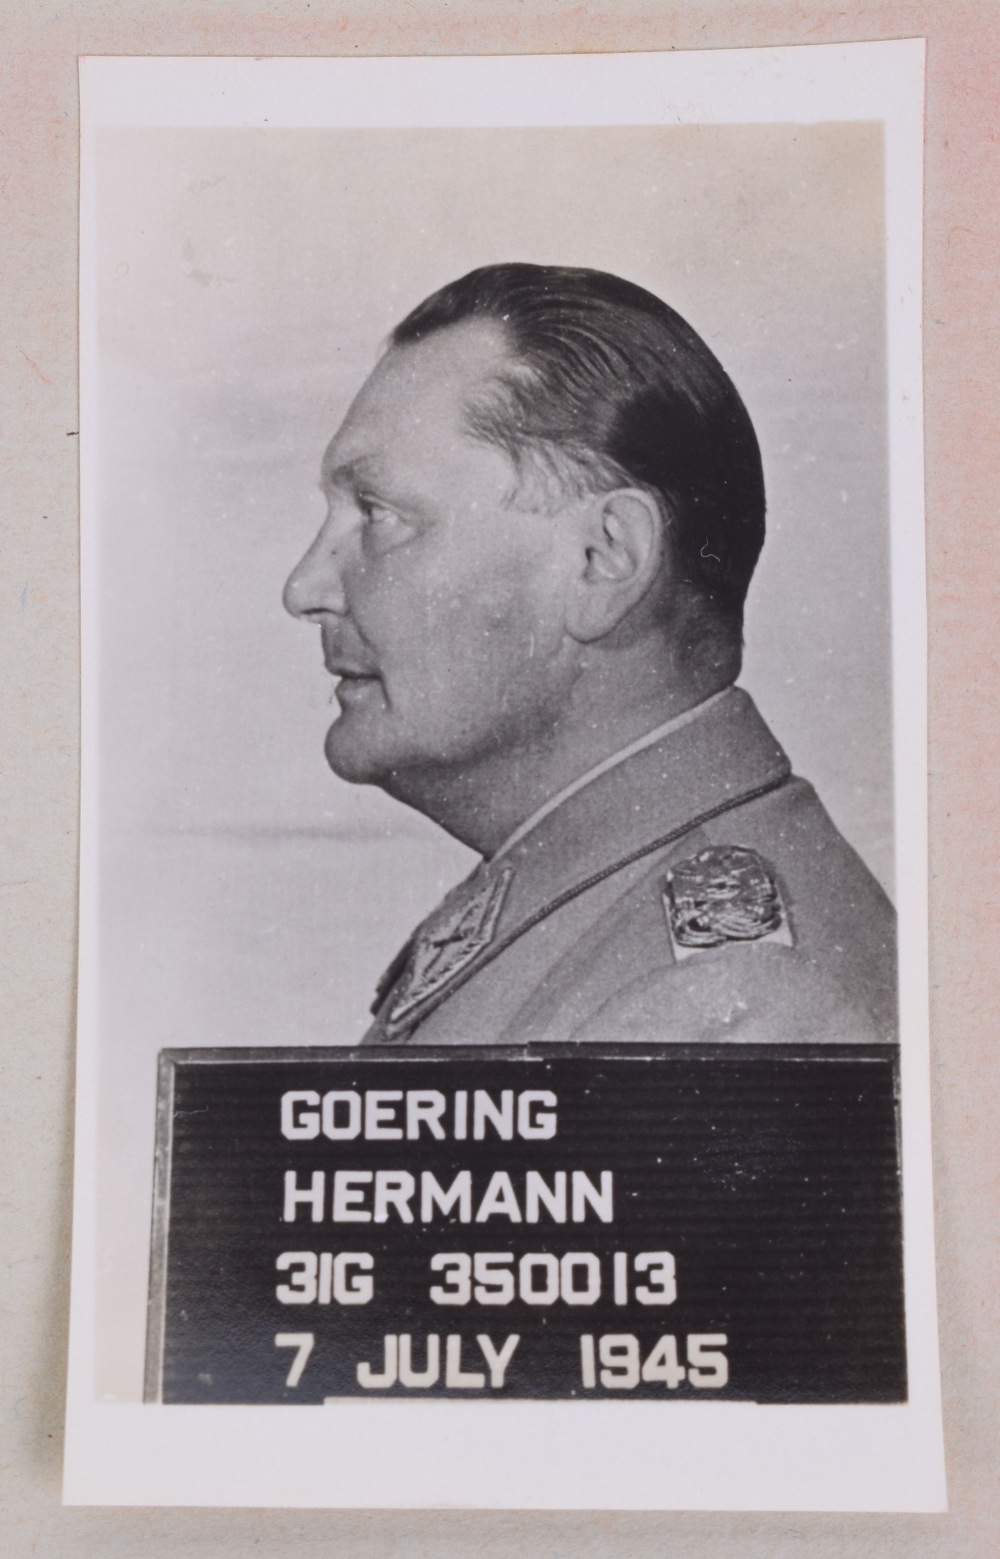 Historically Important Archive of Signatures and Photographs of Nuremberg War Trials Interest,